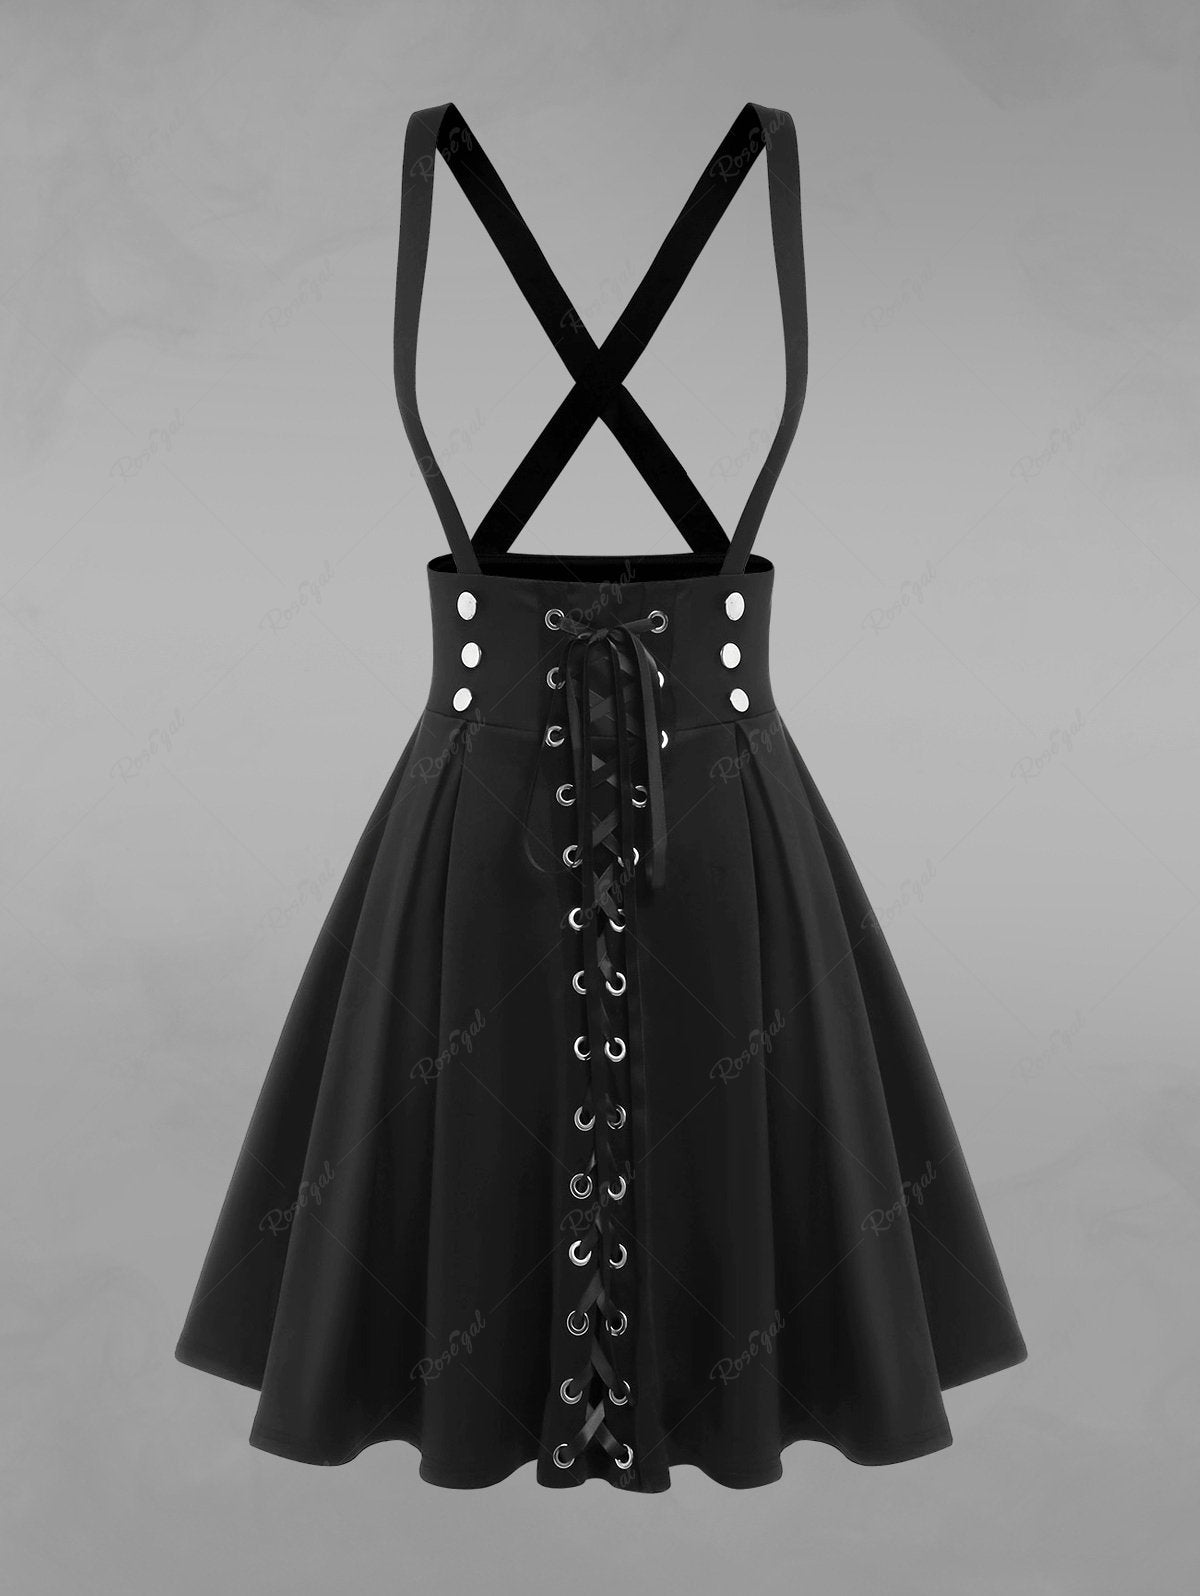 💗Lauren Loves💗 Victorian Goth Pleated Lace Up Suspender Skirt